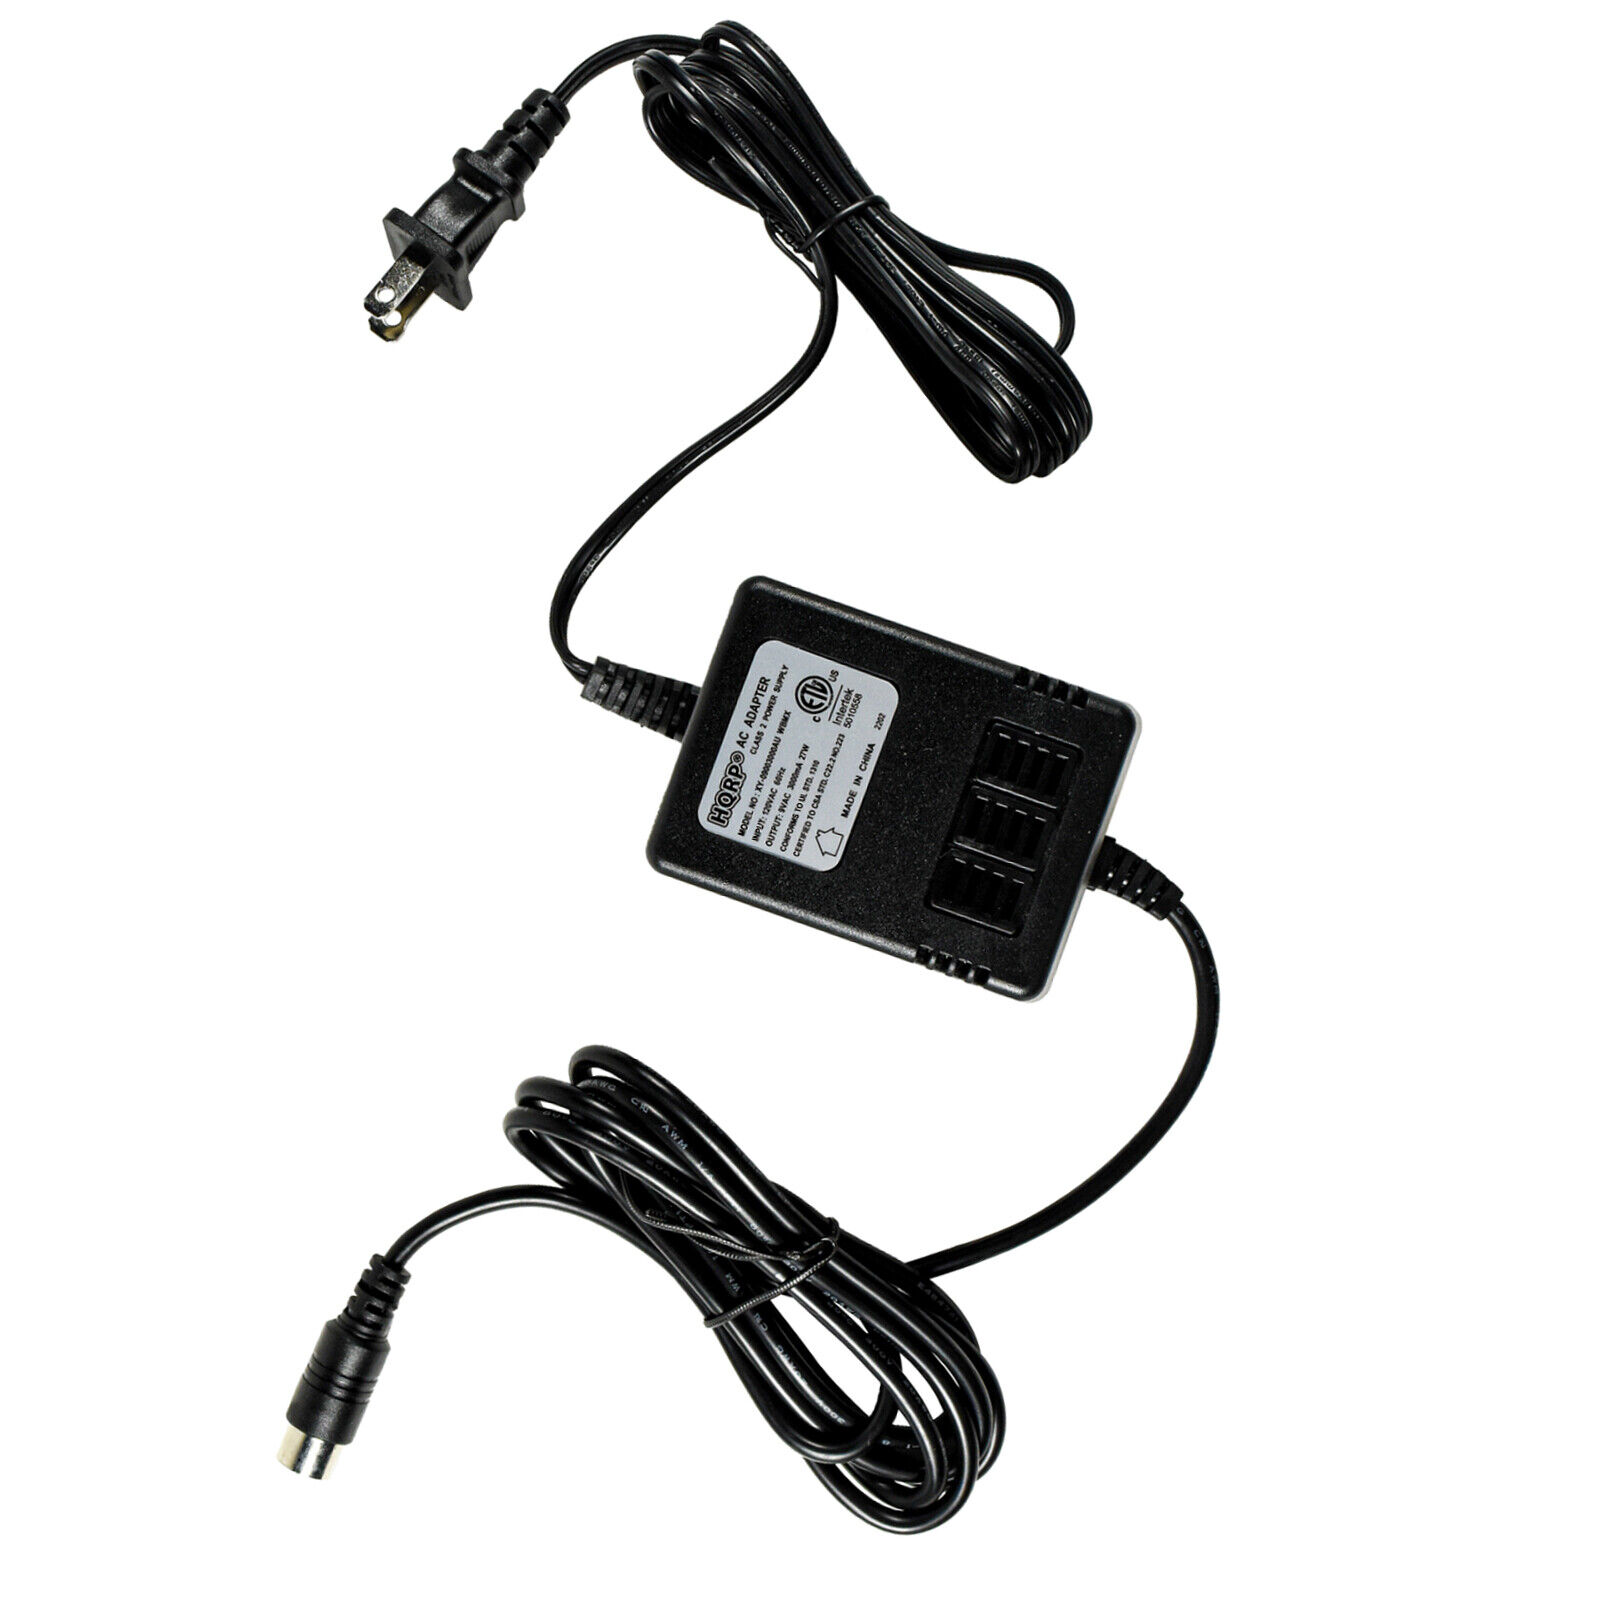 AC Adapter Power Supply for Korg Mixer Synthesizer Piano Recording Studio, KA163 Output 9V, 3A Connector DIN 4 pin Comp - Click Image to Close